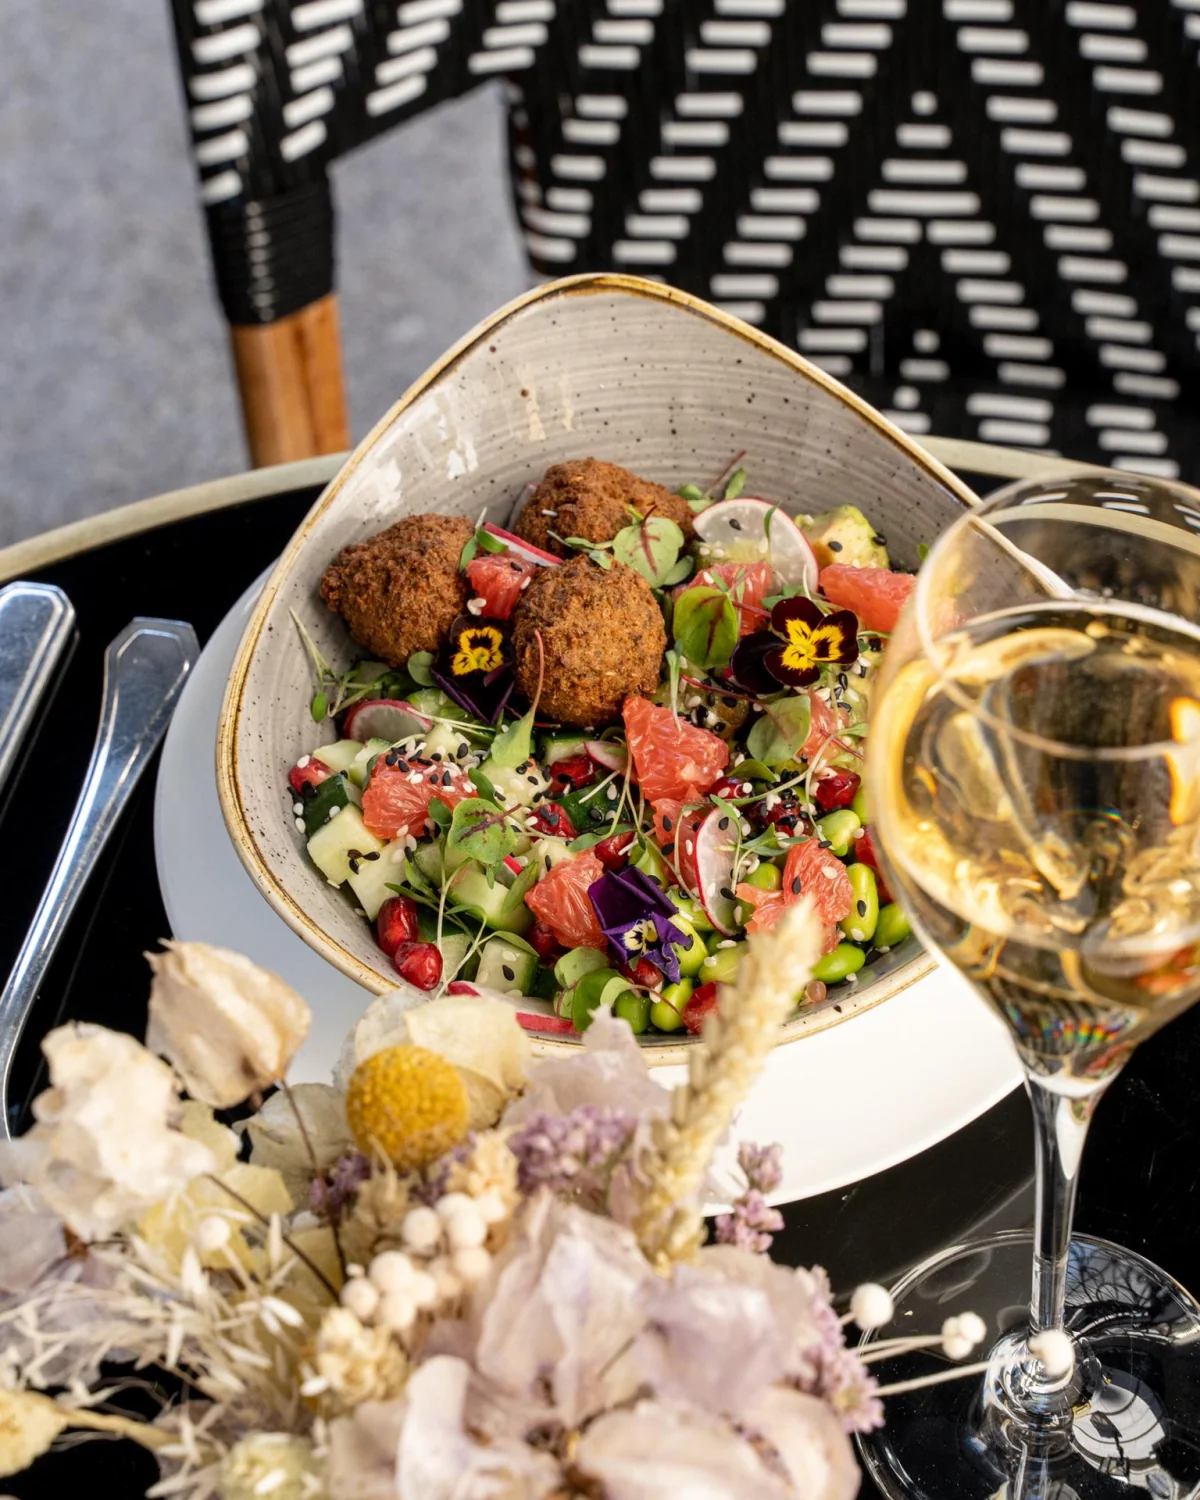 Gourmet salad with vibrant edible flowers and falafel paired with a glass of white wine at Grand Powers Paris, highlighting the hotel's commitment to seasonal and fresh food offerings.